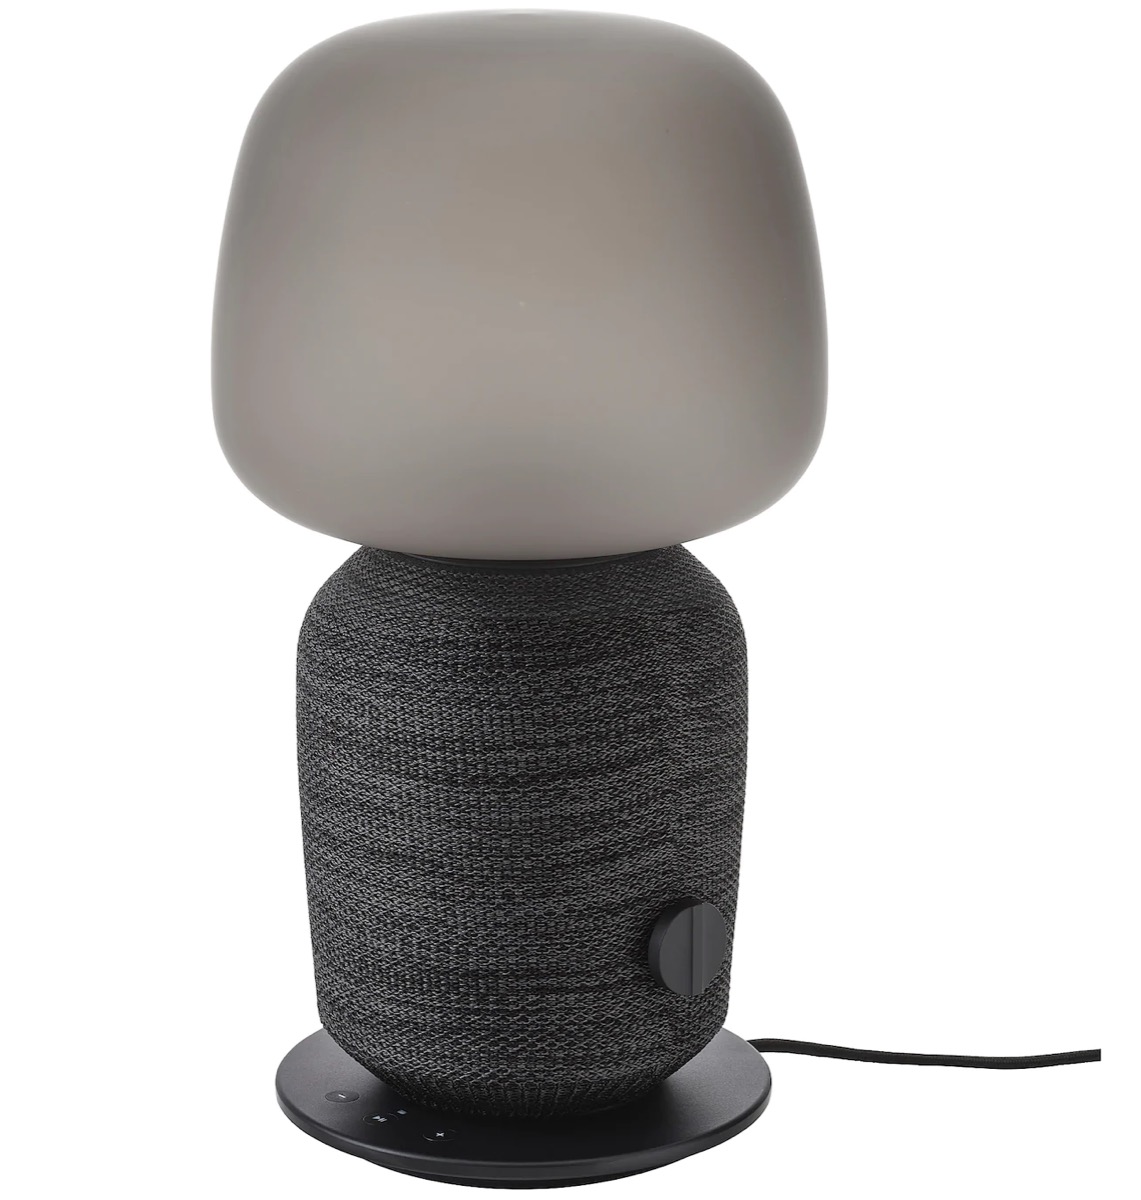 brown lamp with gray speaker base wrapped in woven material